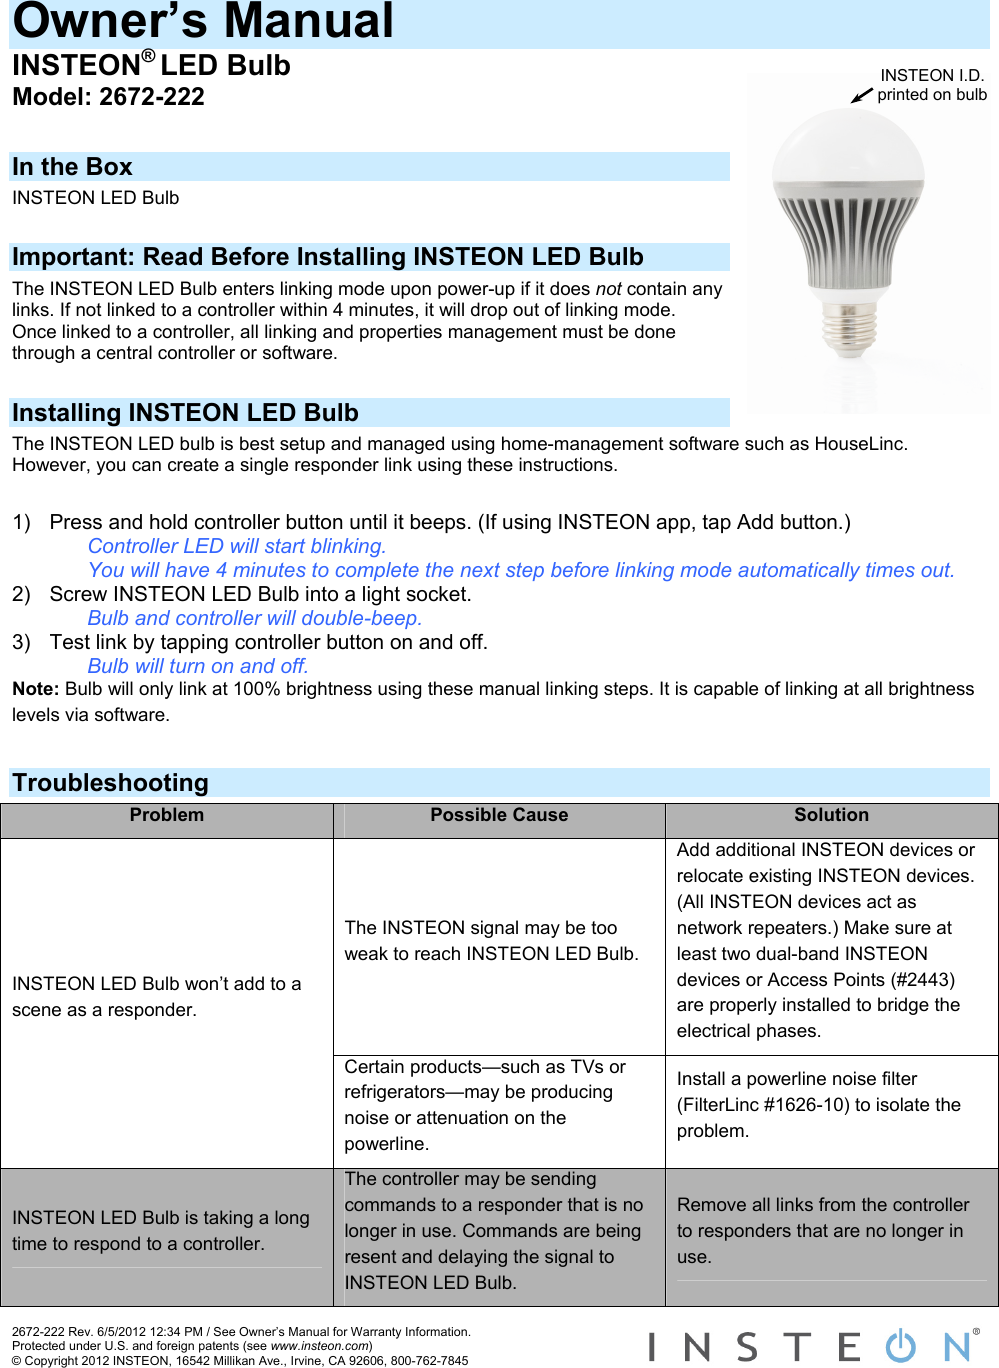 Owner’s Manual INSTEON® LED Bulb INSTEON I.D. printed on bulbModel: 2672-222  In the Box INSTEON LED Bulb  Important: Read Before Installing INSTEON LED Bulb The INSTEON LED Bulb enters linking mode upon power-up if it does not contain any links. If not linked to a controller within 4 minutes, it will drop out of linking mode. Once linked to a controller, all linking and properties management must be done through a central controller or software.  Installing INSTEON LED Bulb The INSTEON LED bulb is best setup and managed using home-management software such as HouseLinc.  However, you can create a single responder link using these instructions.  1)  Press and hold controller button until it beeps. (If using INSTEON app, tap Add button.)     Controller LED will start blinking.     You will have 4 minutes to complete the next step before linking mode automatically times out. 2)  Screw INSTEON LED Bulb into a light socket.     Bulb and controller will double-beep. 3)  Test link by tapping controller button on and off.    Bulb will turn on and off. Note: Bulb will only link at 100% brightness using these manual linking steps. It is capable of linking at all brightness levels via software.  Troubleshooting Problem  Possible Cause  Solution The INSTEON signal may be too weak to reach INSTEON LED Bulb. Add additional INSTEON devices or relocate existing INSTEON devices. (All INSTEON devices act as network repeaters.) Make sure at least two dual-band INSTEON devices or Access Points (#2443) are properly installed to bridge the electrical phases. INSTEON LED Bulb won’t add to a scene as a responder. Certain products—such as TVs or refrigerators—may be producing noise or attenuation on the powerline. Install a powerline noise filter (FilterLinc #1626-10) to isolate the problem. INSTEON LED Bulb is taking a long time to respond to a controller. The controller may be sending commands to a responder that is no longer in use. Commands are being resent and delaying the signal to INSTEON LED Bulb. Remove all links from the controller to responders that are no longer in use. 2672-222 Rev. 6/5/2012 12:34 PM / See Owner’s Manual for Warranty Information. Protected under U.S. and foreign patents (see www.insteon.com) © Copyright 2012 INSTEON, 16542 Millikan Ave., Irvine, CA 92606, 800-762-7845   